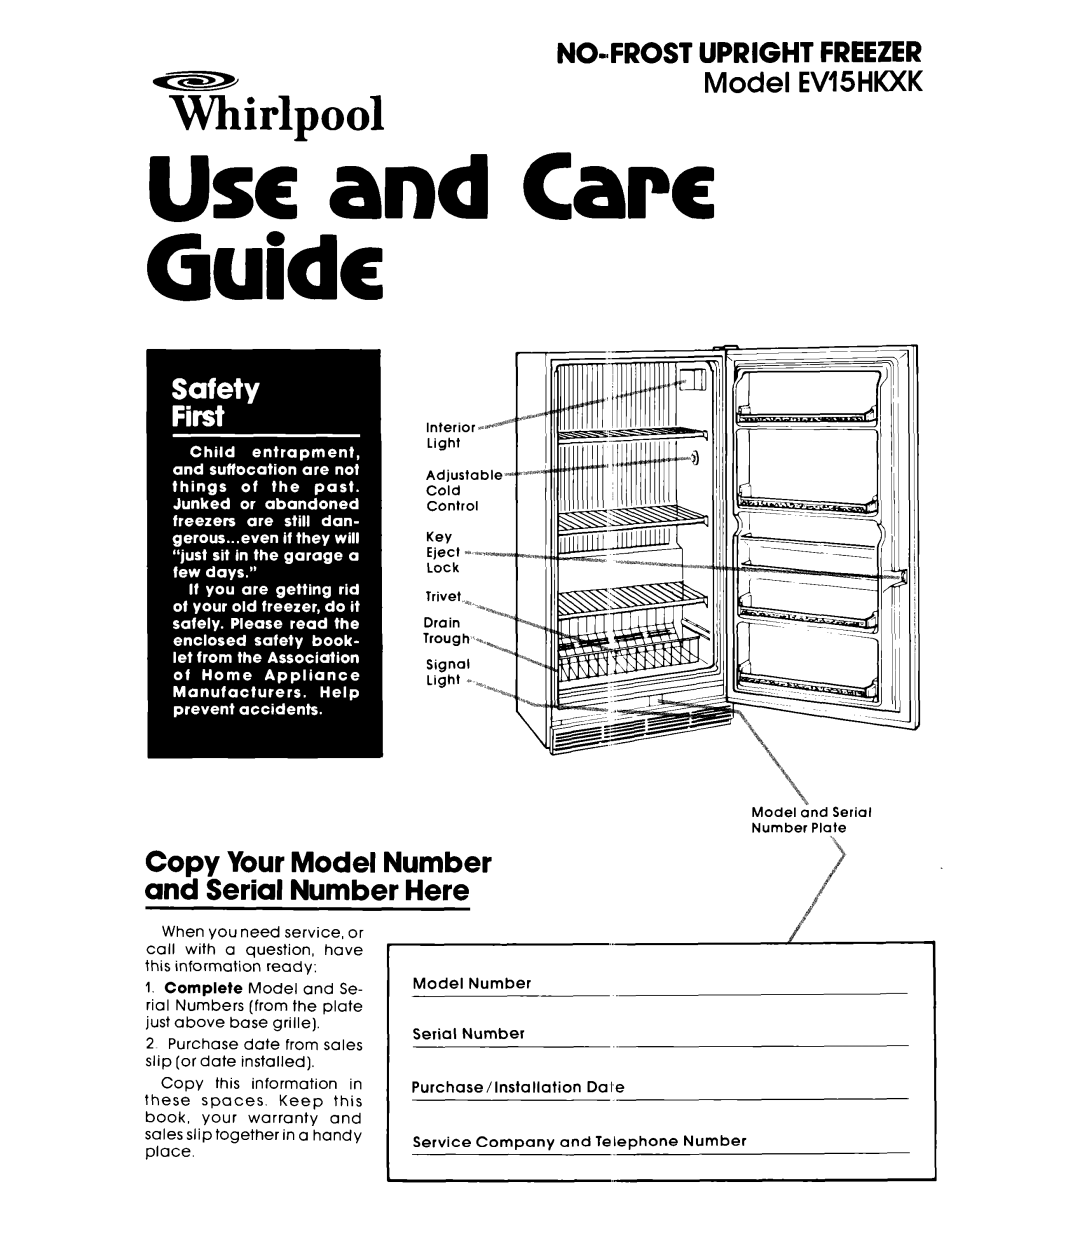 Whirlpool manual Whirlpool, NO-#FROSTUPRIGHTFREEZER Model EVISHKXK, Copy, Number, Serial, Here, USC and Care Guide 